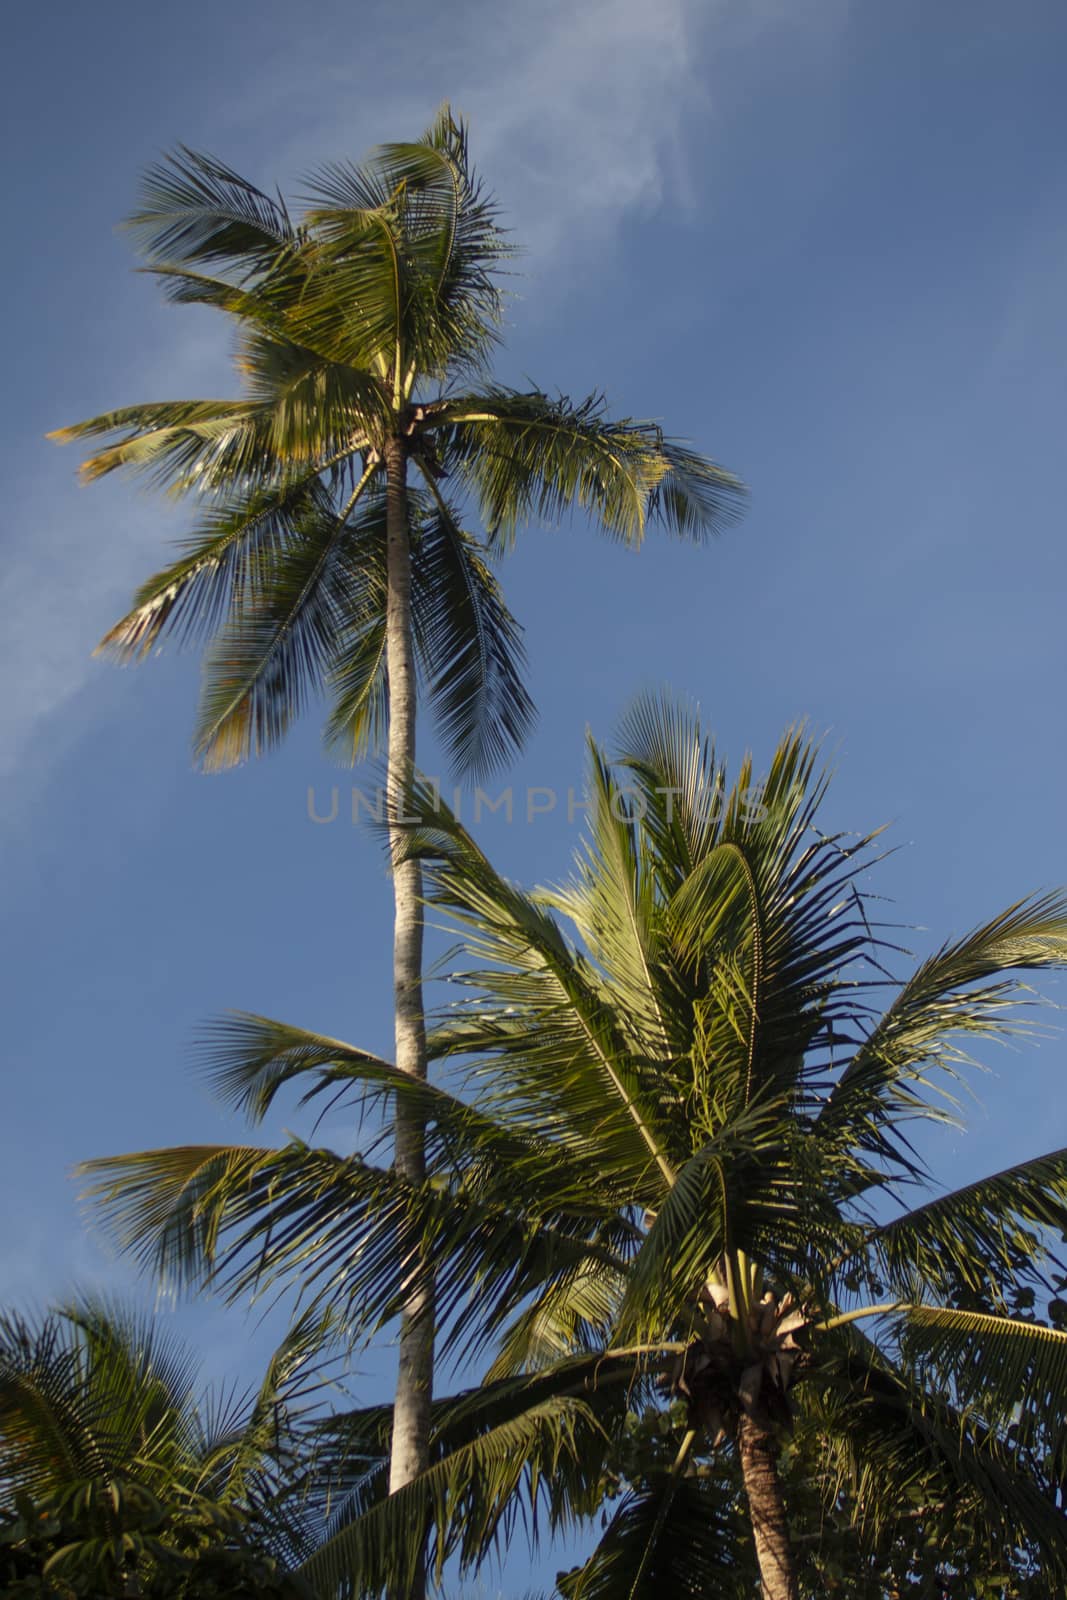 Dominican palm tree 2 by pippocarlot